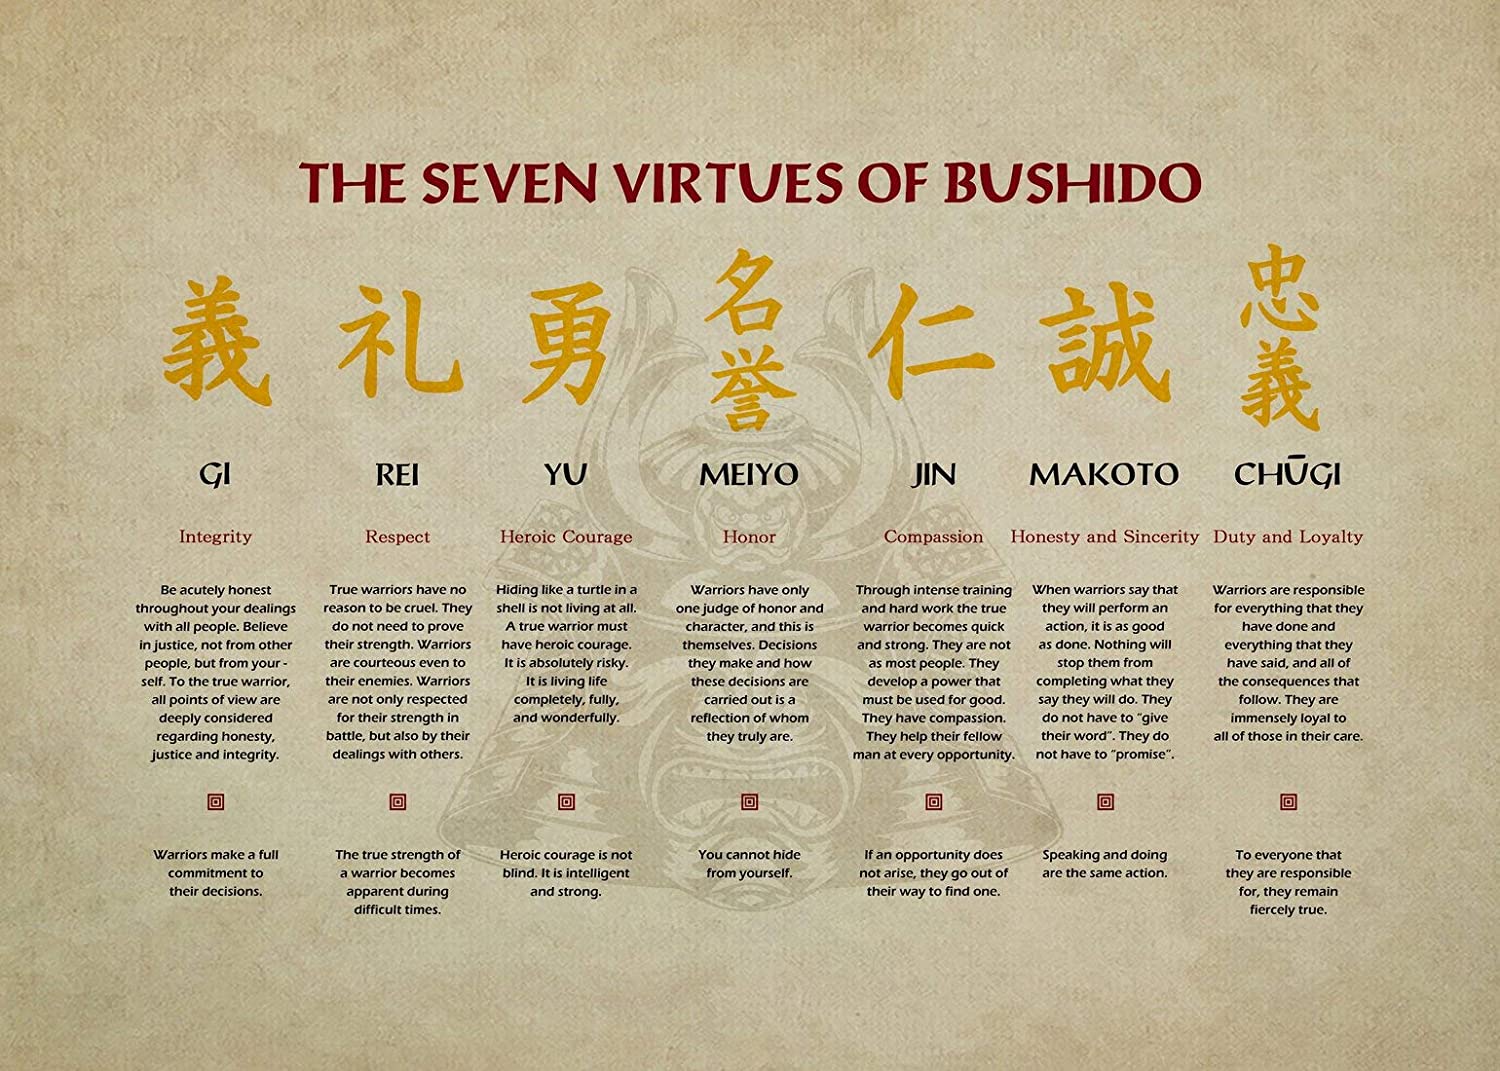 A combination of Japanese and English to depict the values of the Bushido